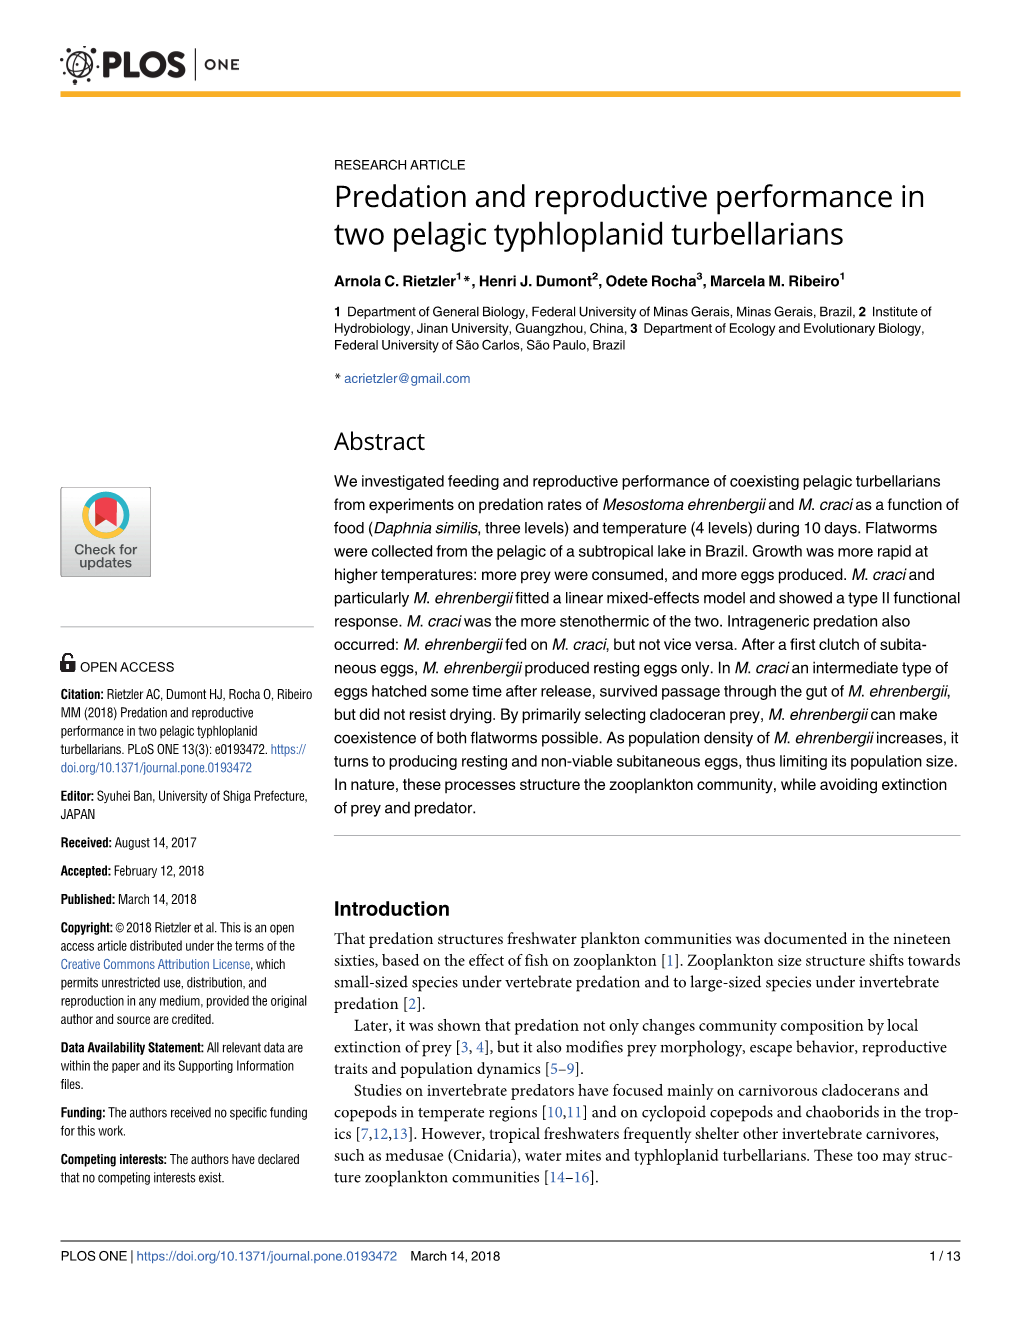 Predation and Reproductive Performance in Two Pelagic Typhloplanid Turbellarians